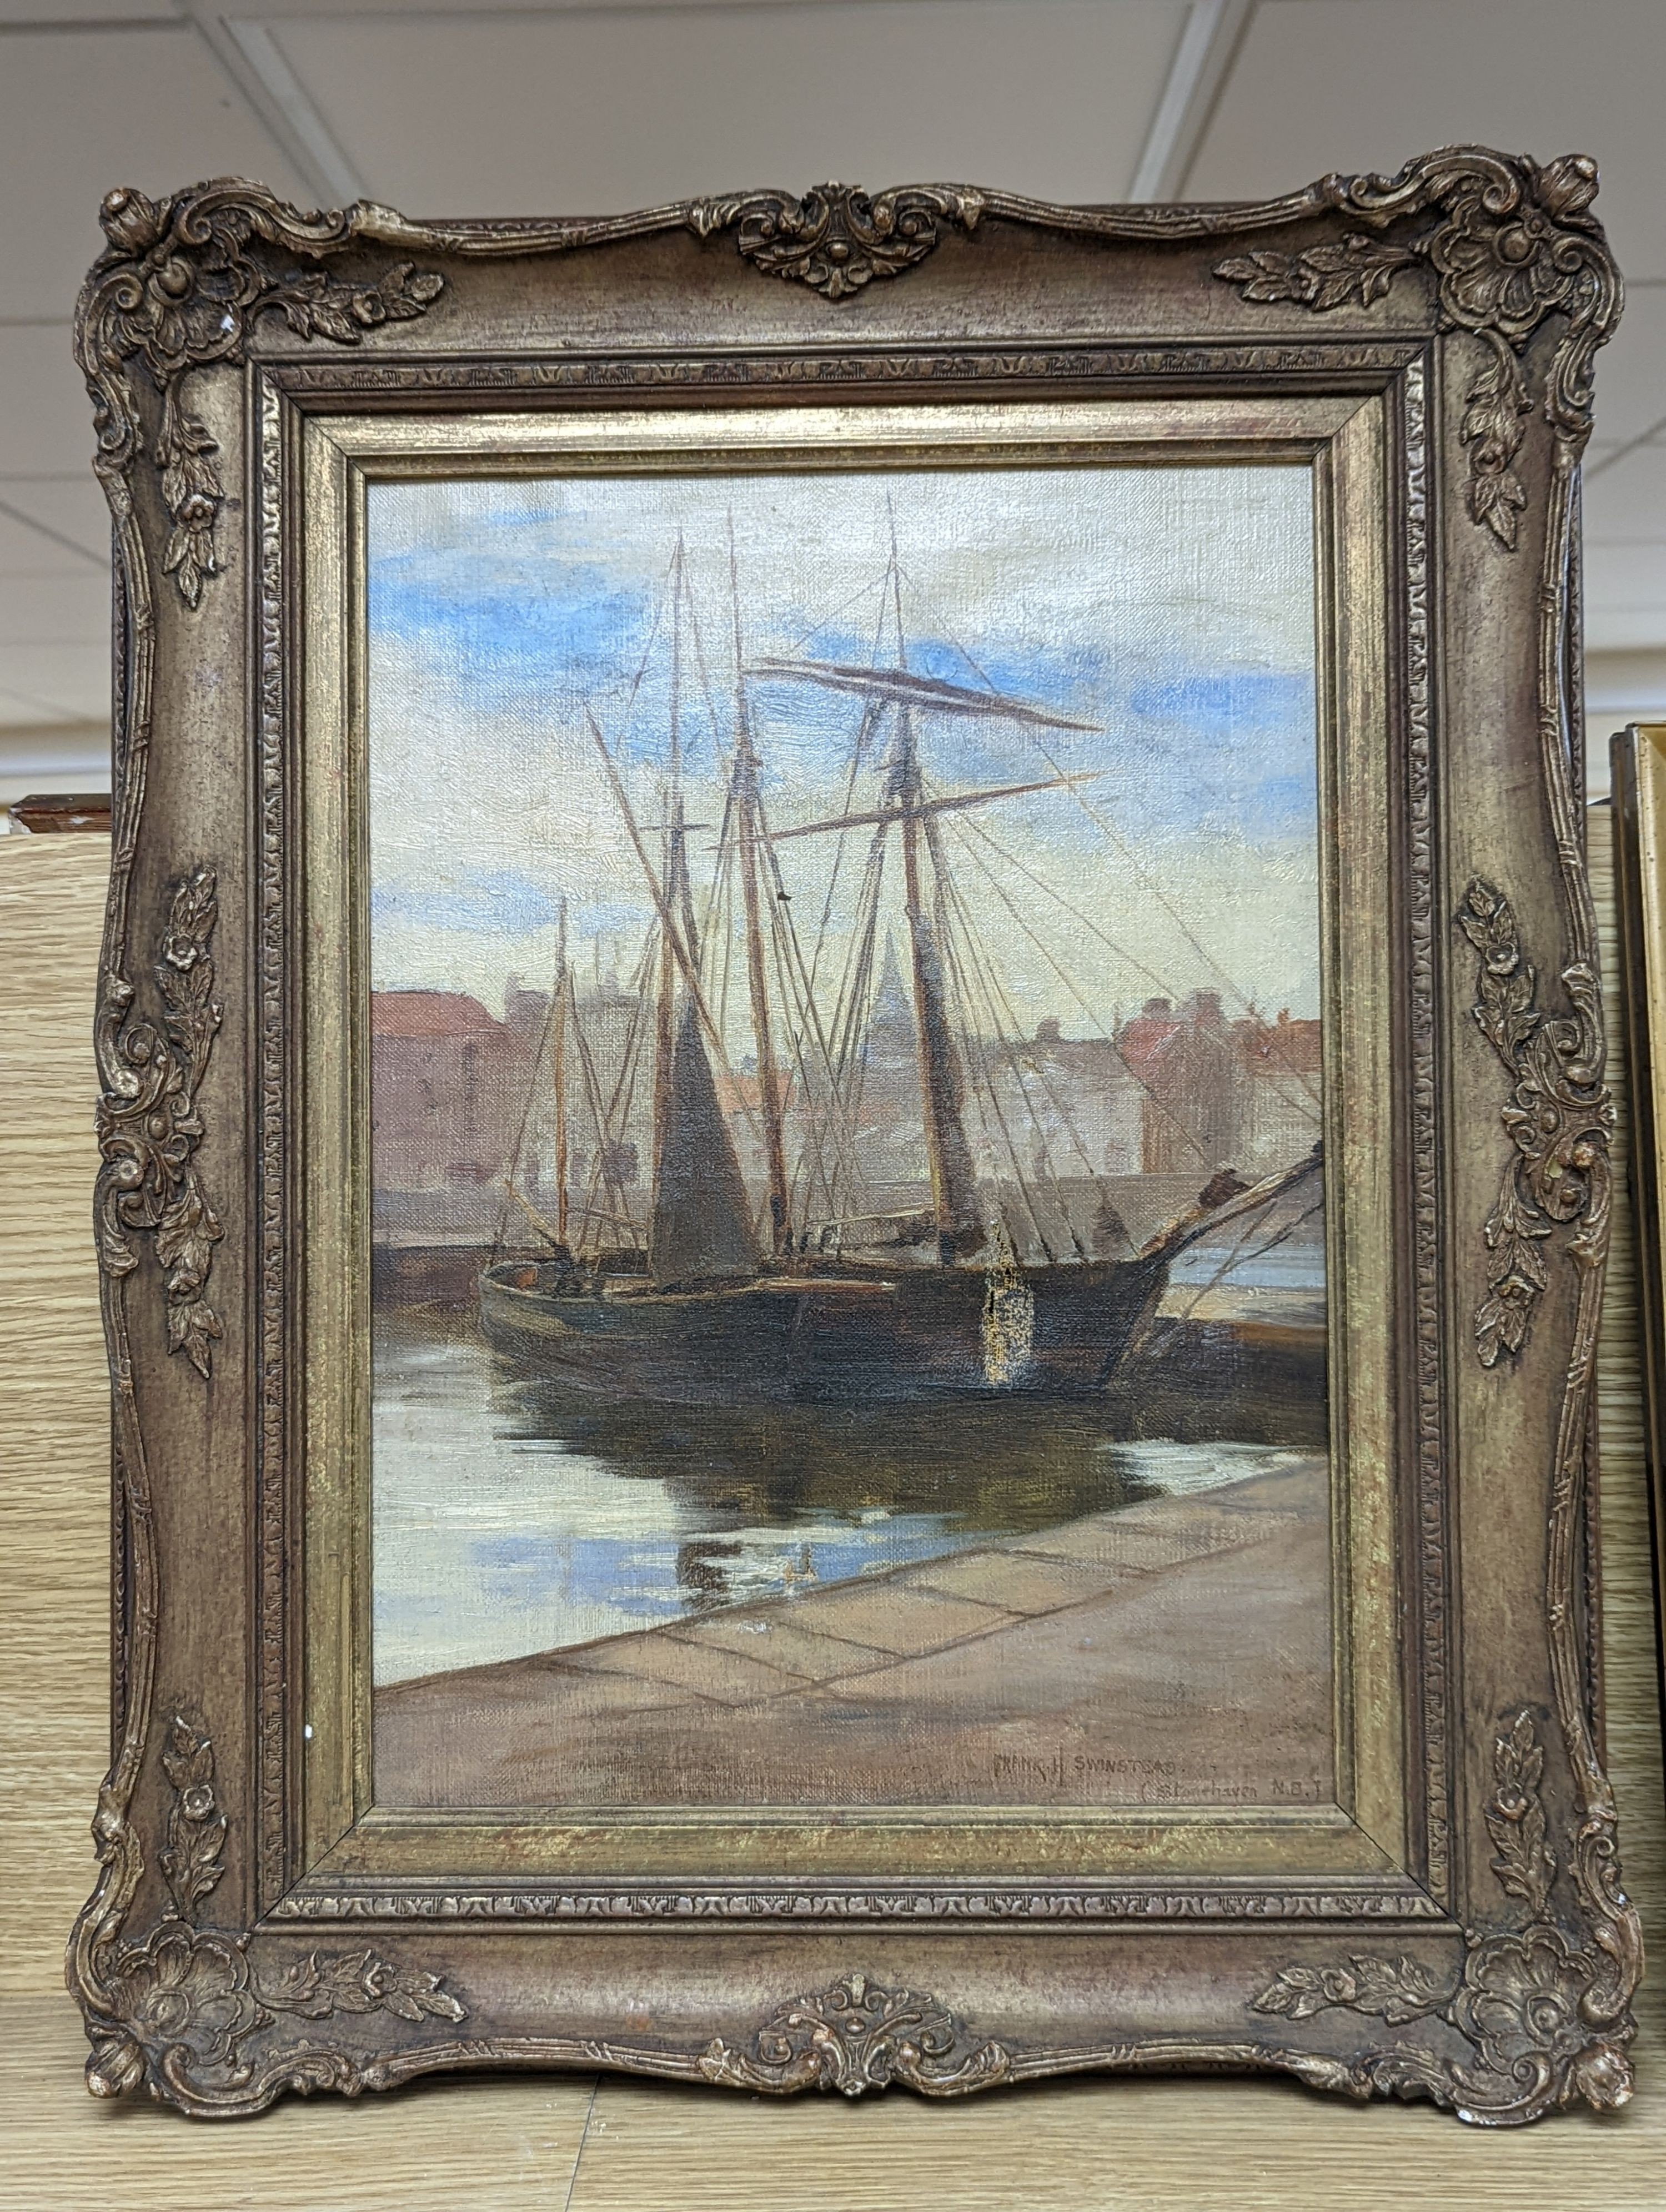 Frank Hillyard Swinstead (1862 - 1937), oil on canvas, Stonehaven harbour, signed and inscribed 'Stonehaven NB', 36 x 26cm